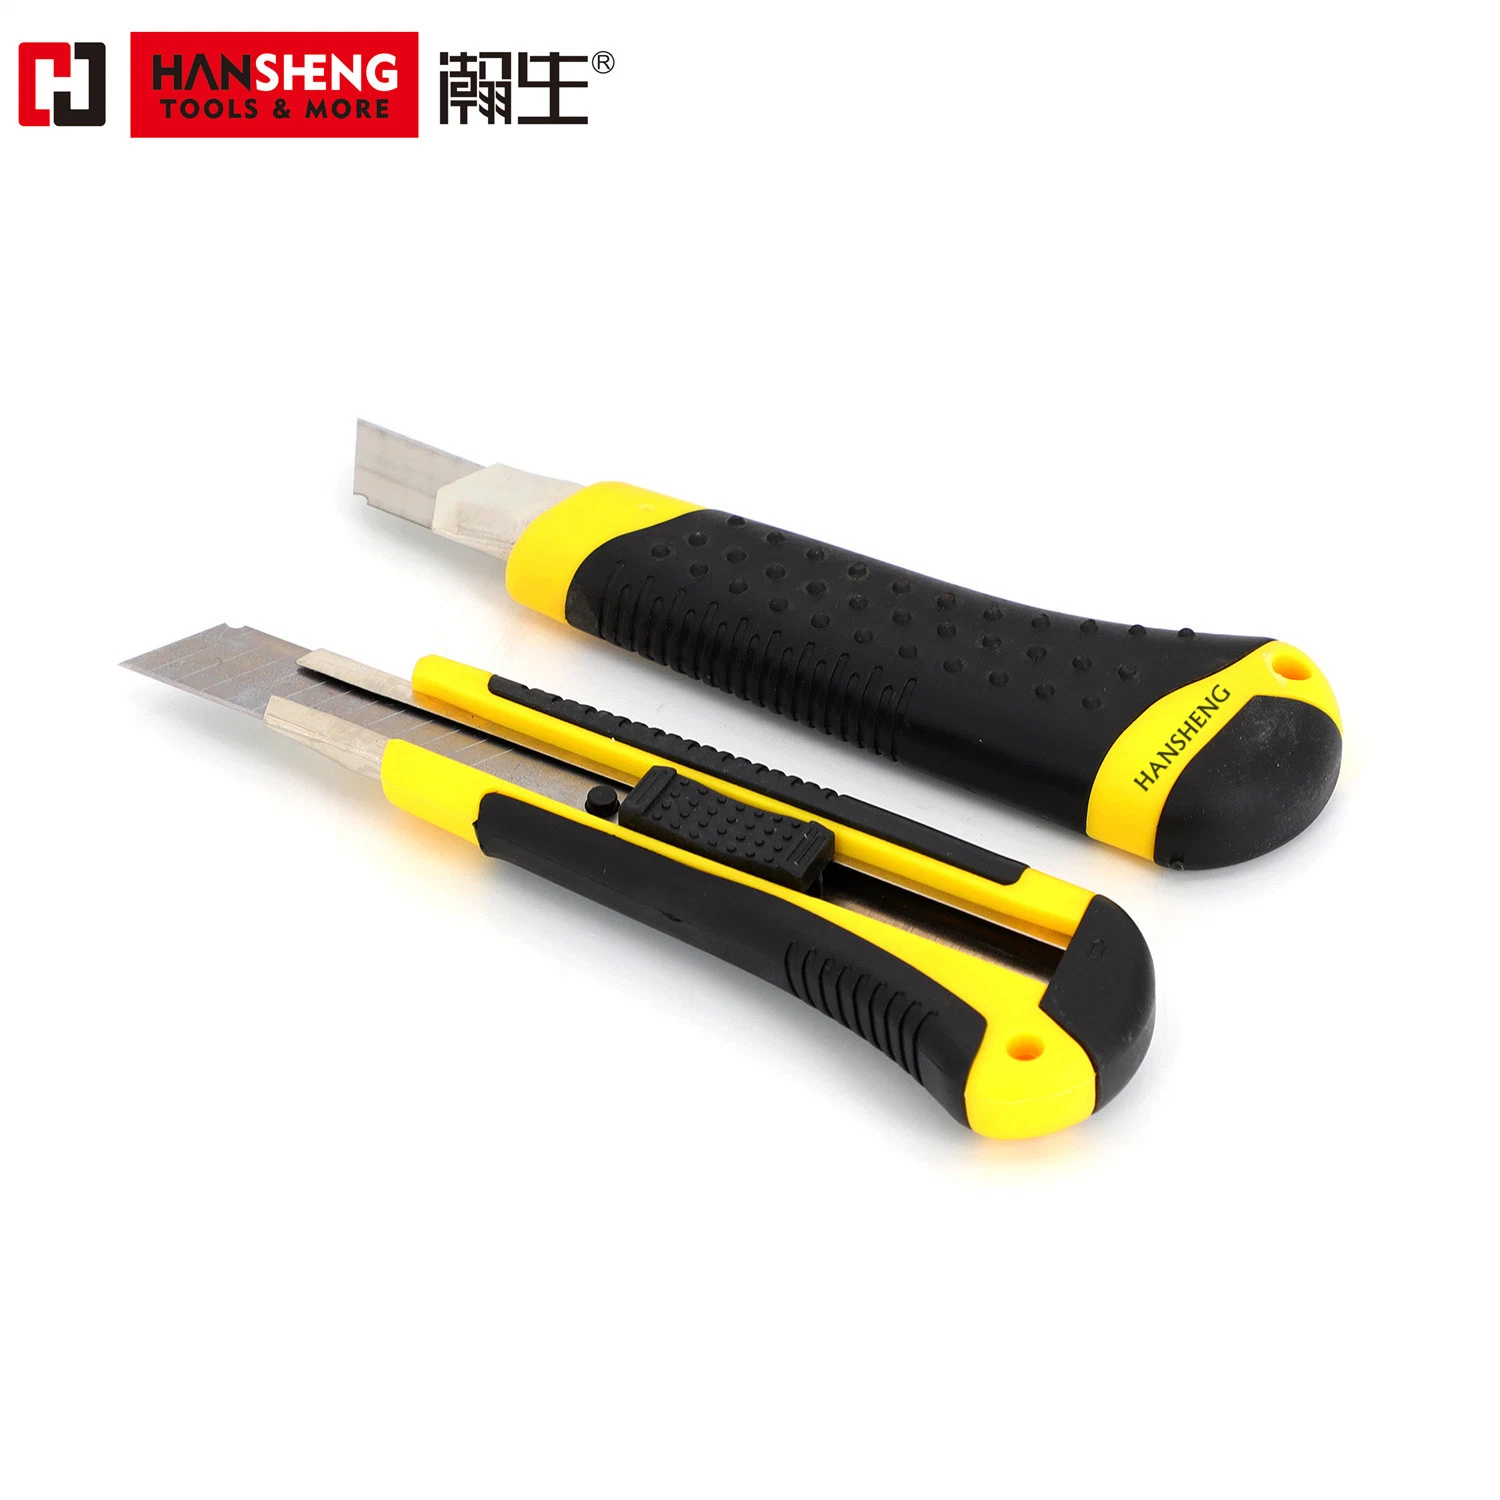 Utility Knife/Art Knife, Snap-off Blade Plastic Safety Utility Cutter, TPR Plastic Handle, for Office, Home, Arts, Knife for Paper, Black and Yellow, 18mm